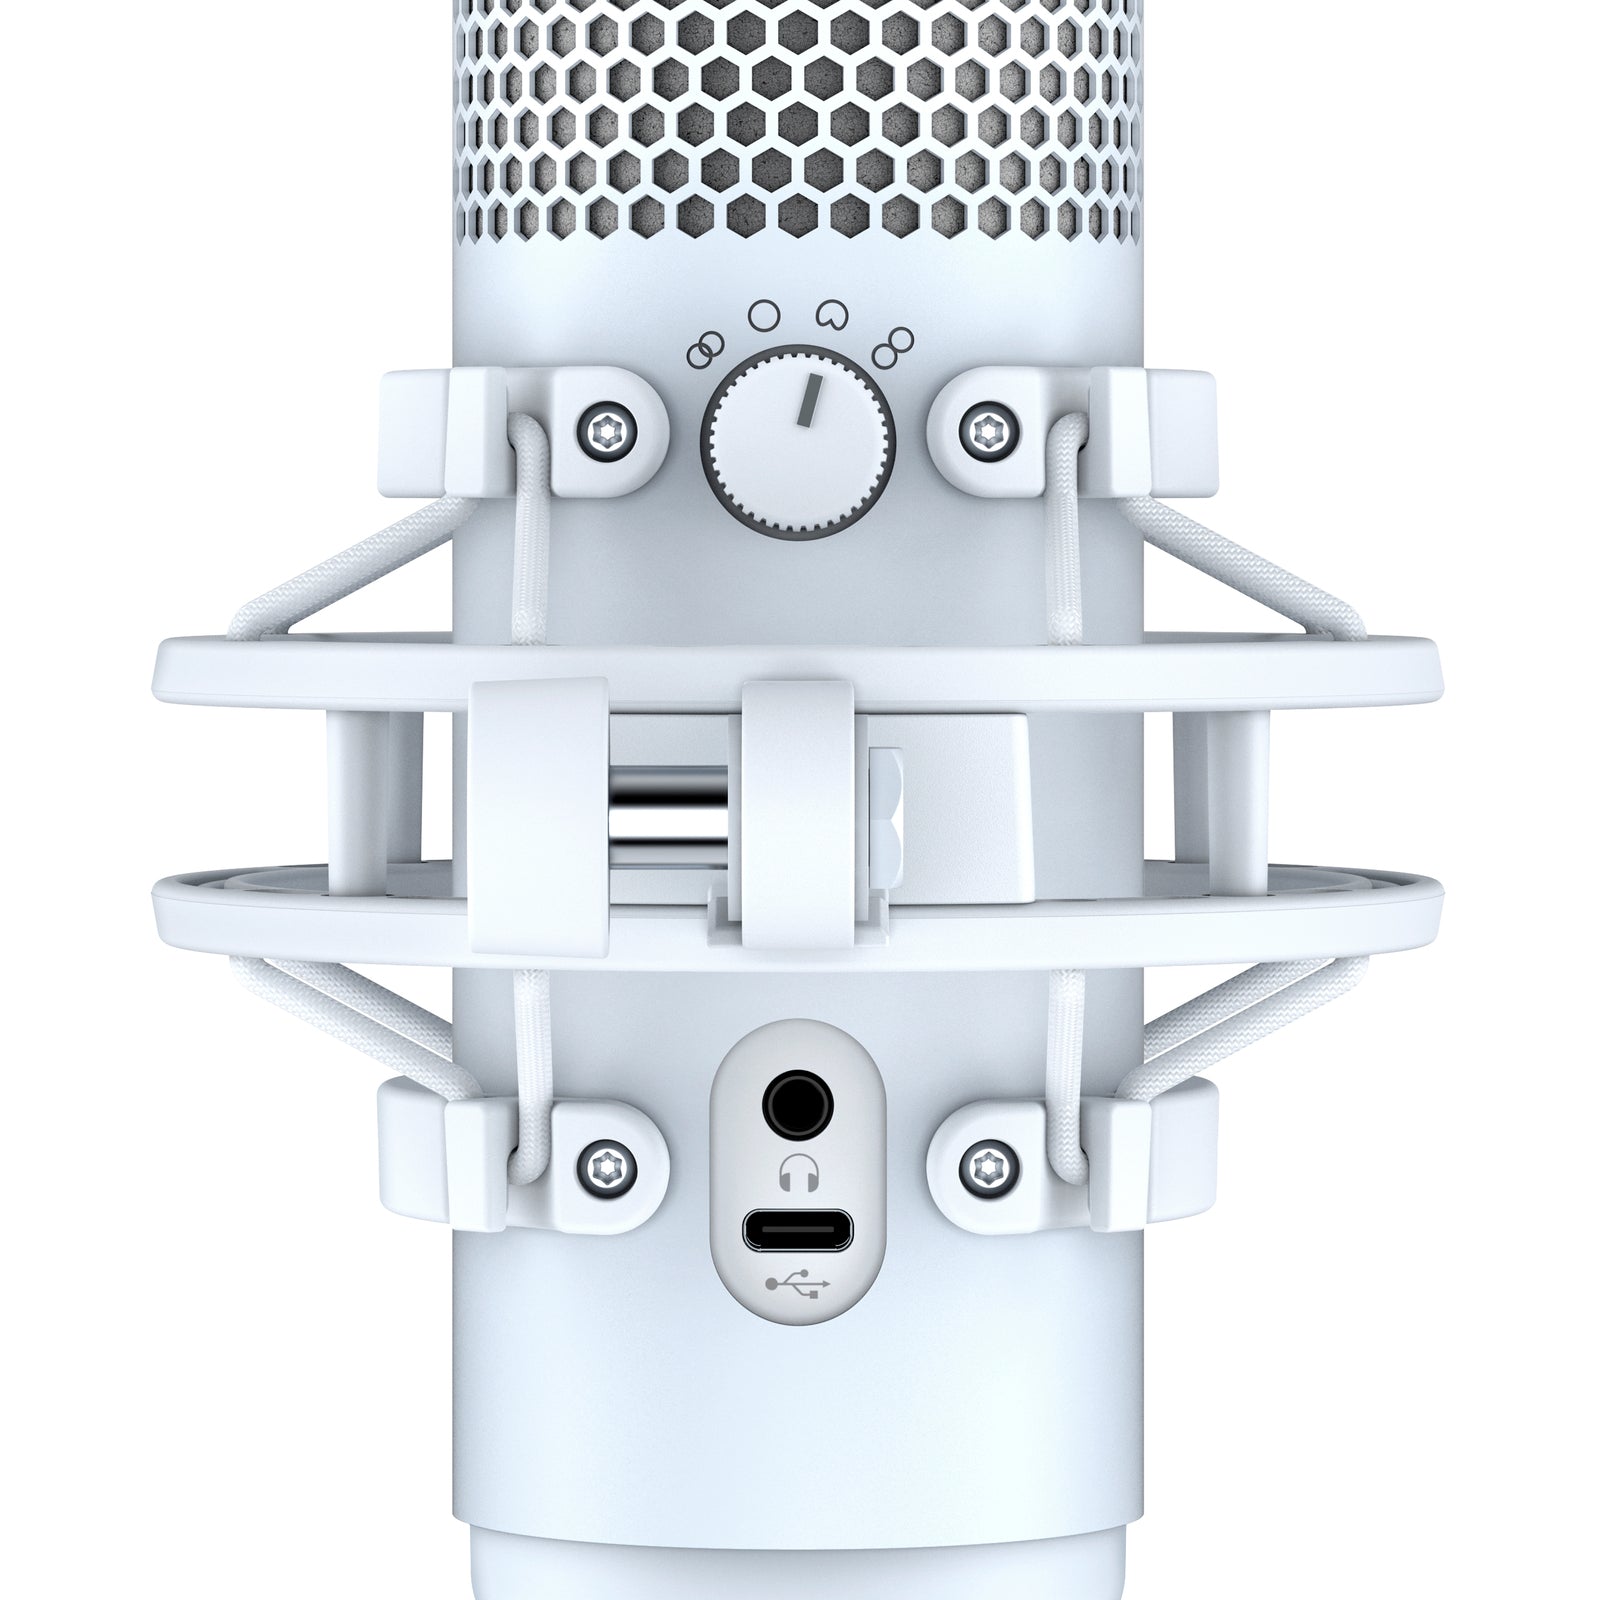 HyperX Quadcast S Microphone White Showing Back Features